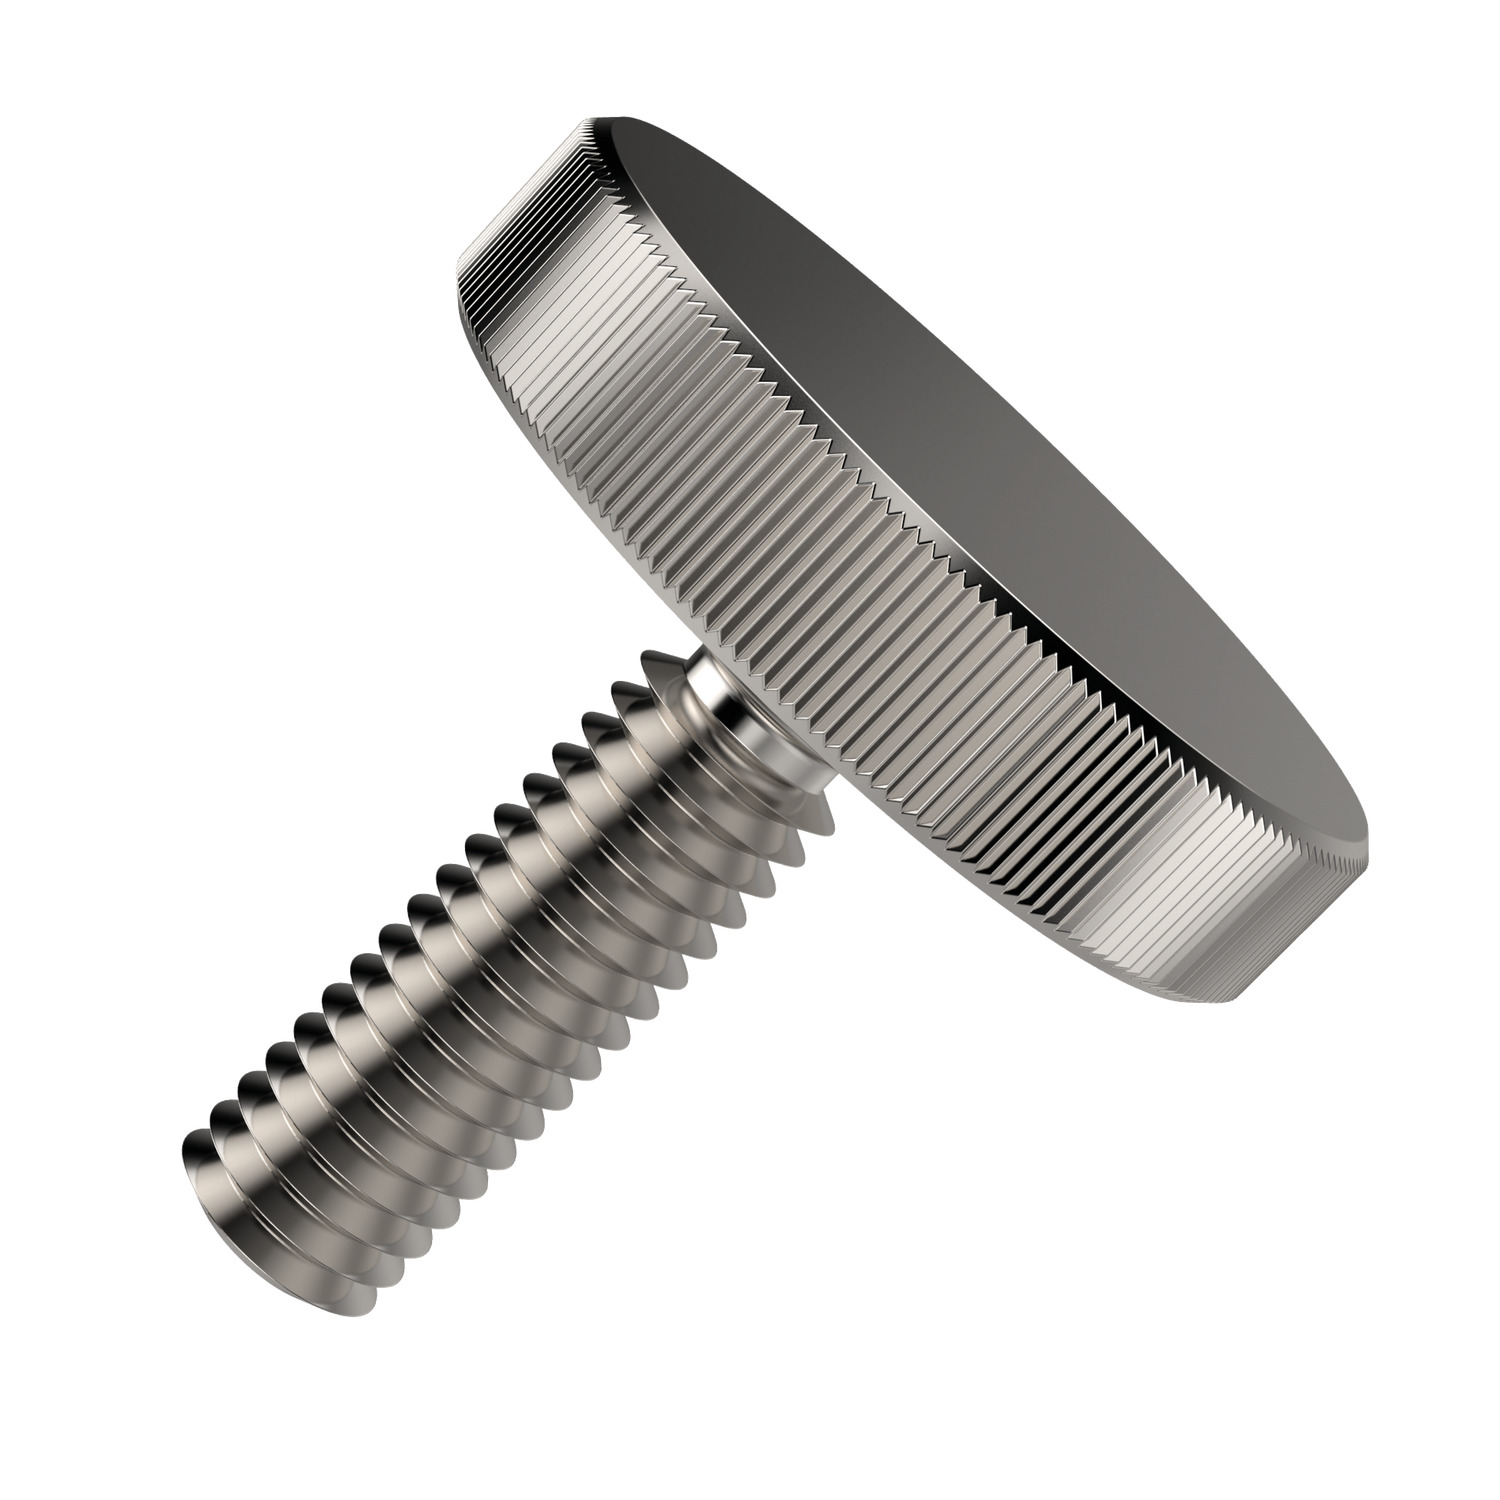 Flat Knurled Thumb Screws A stainless steel (1.4305, AISI 303) knurled thumb screw is made to DIN 653.